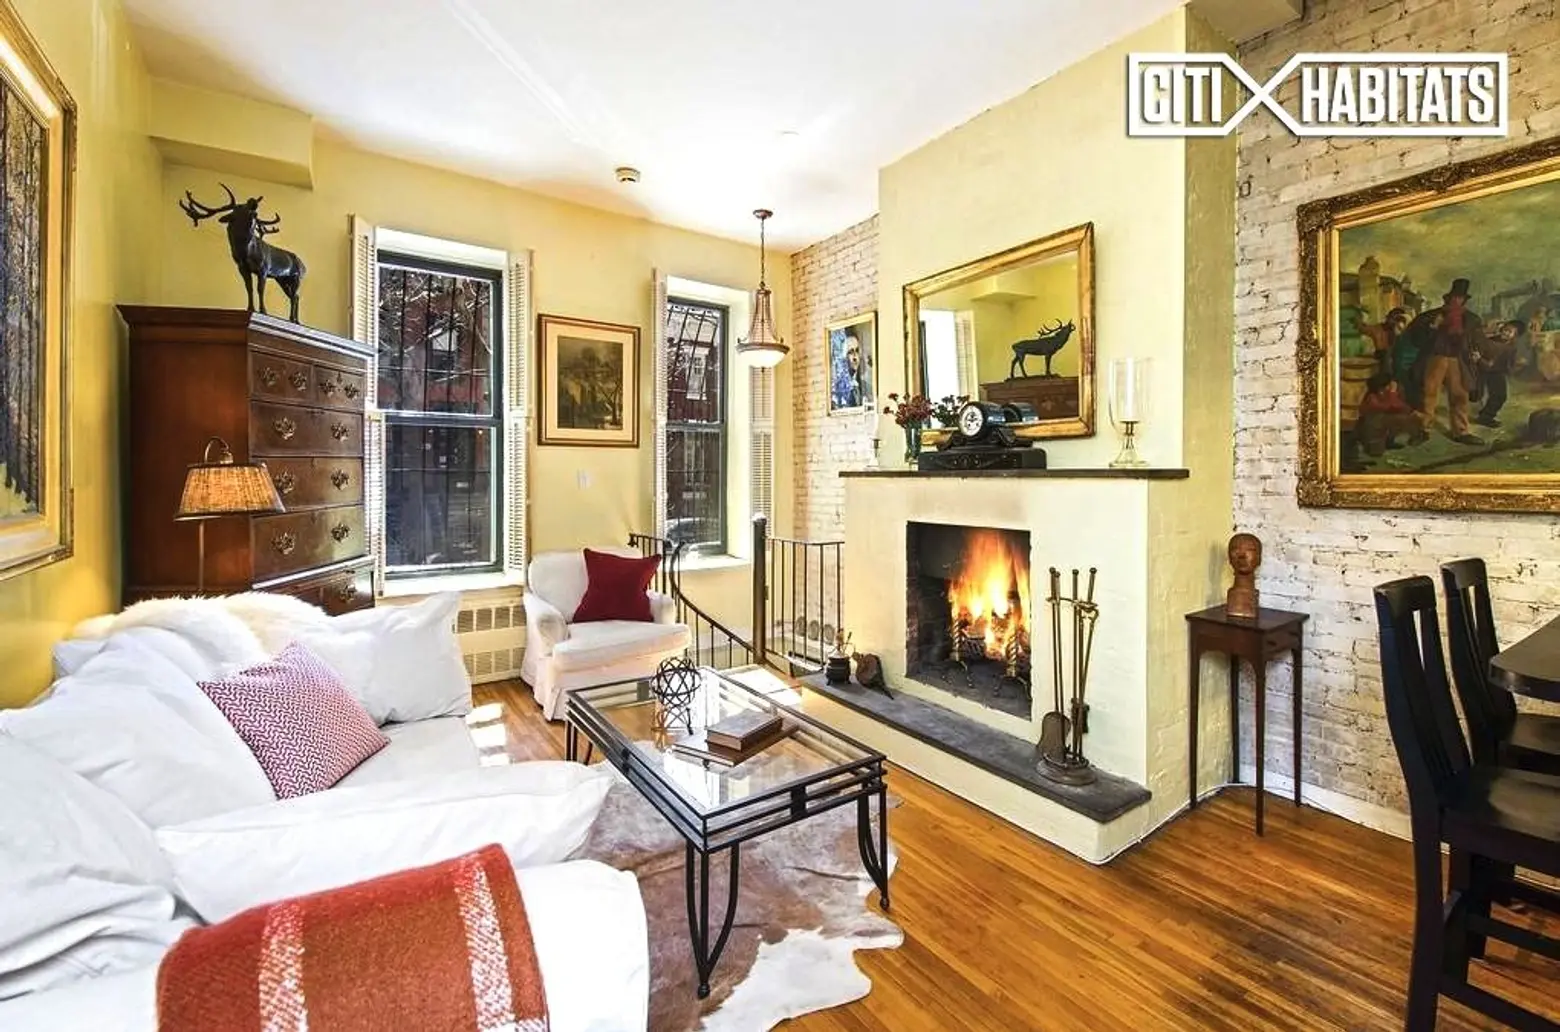 This cozy duplex within a Yorkville brownstone is asking a reasonable $695K